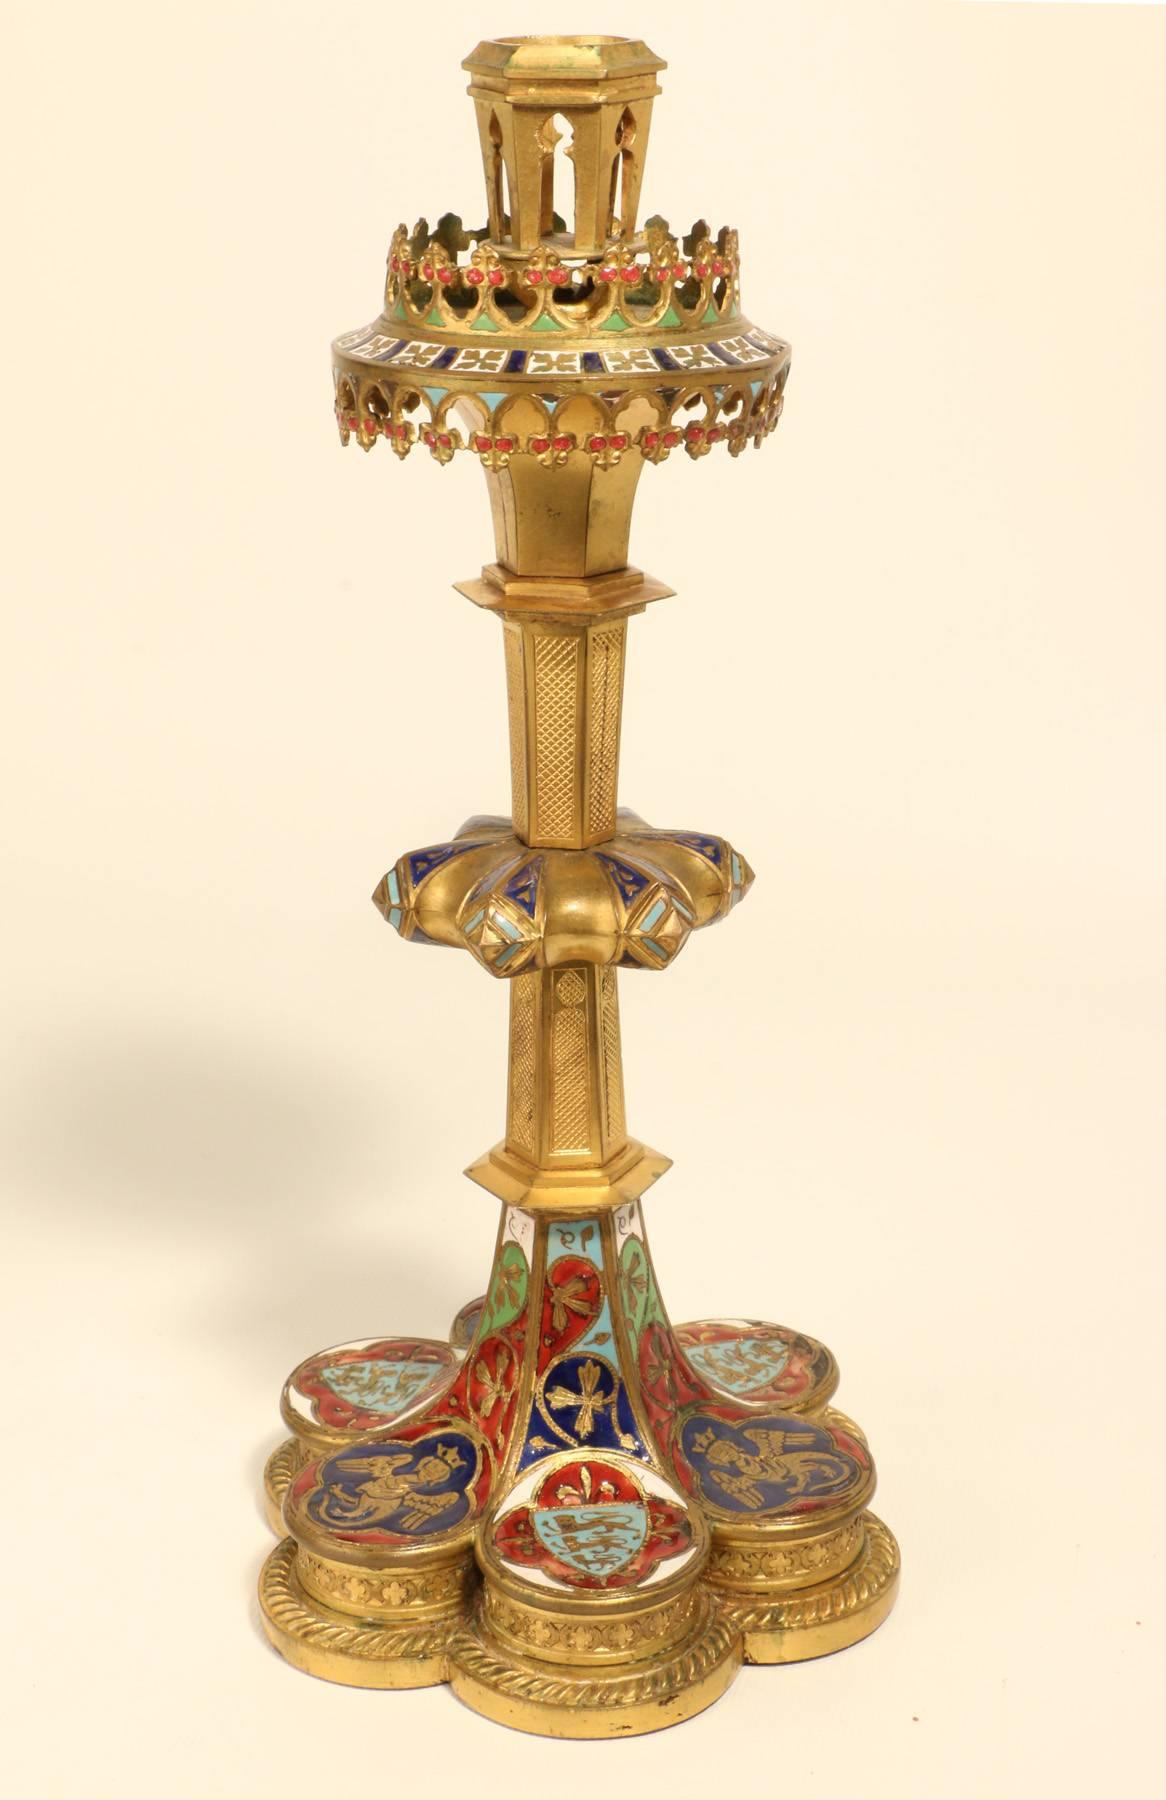 A rare pair of antique English Neo-Medieval gilt bronze and enameled candlesticks, each raised on a gadrooned lobed hexafoil base, enameled with alternating roundels depicting a shield with three leopards of graduated size, and a metamorphic figure